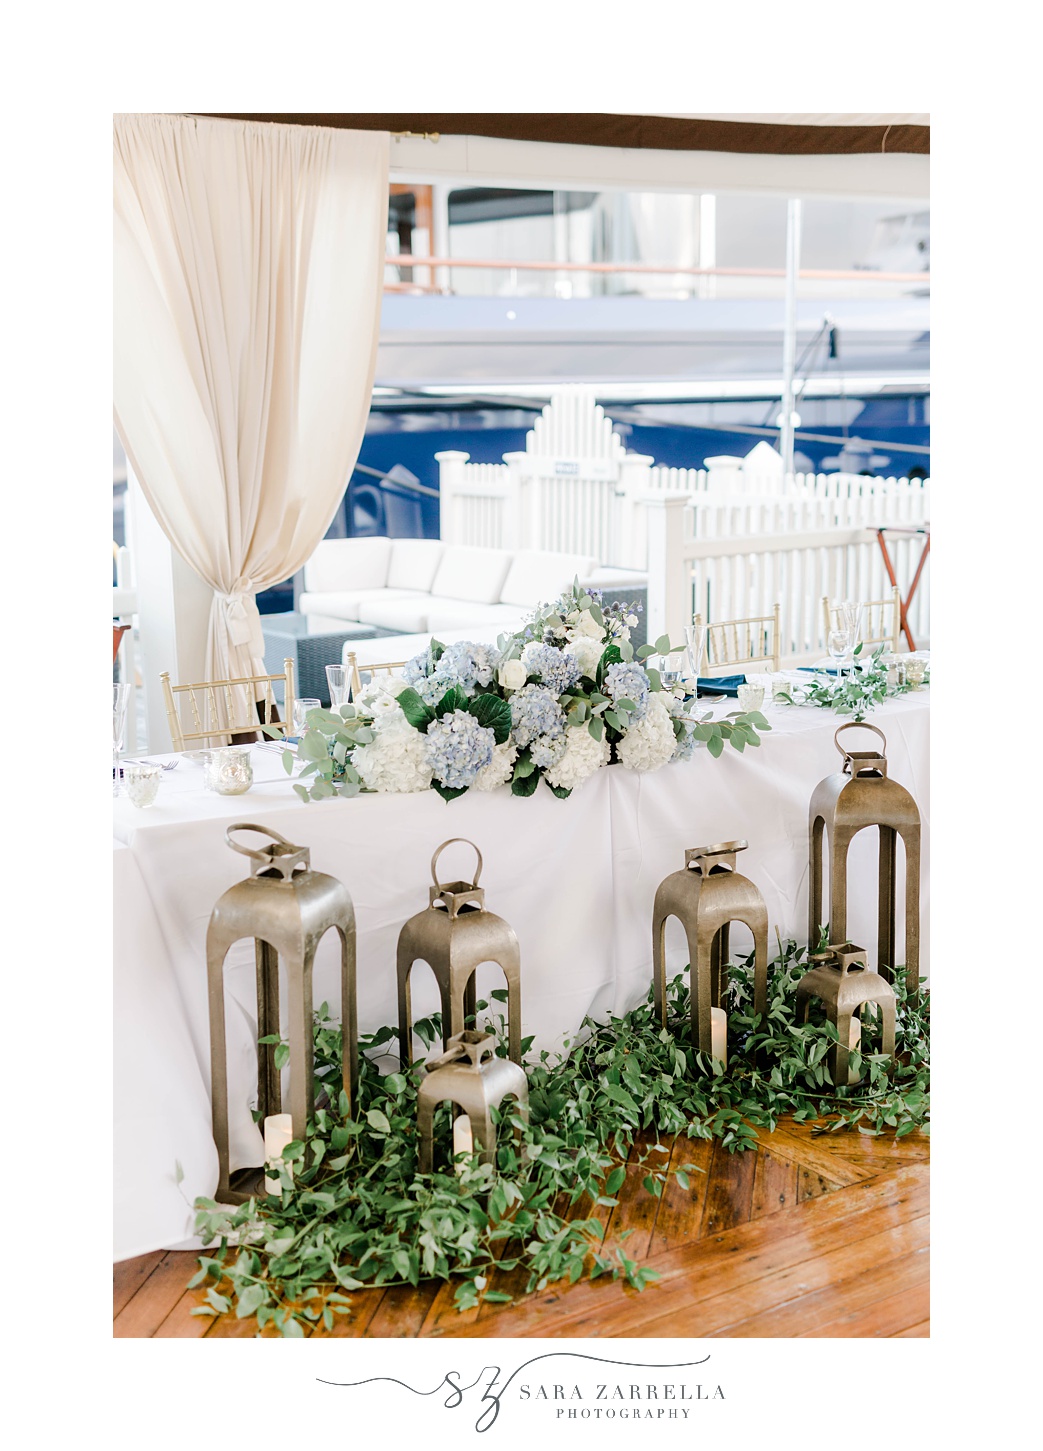 sweetheart table with greenery and lanterns in front